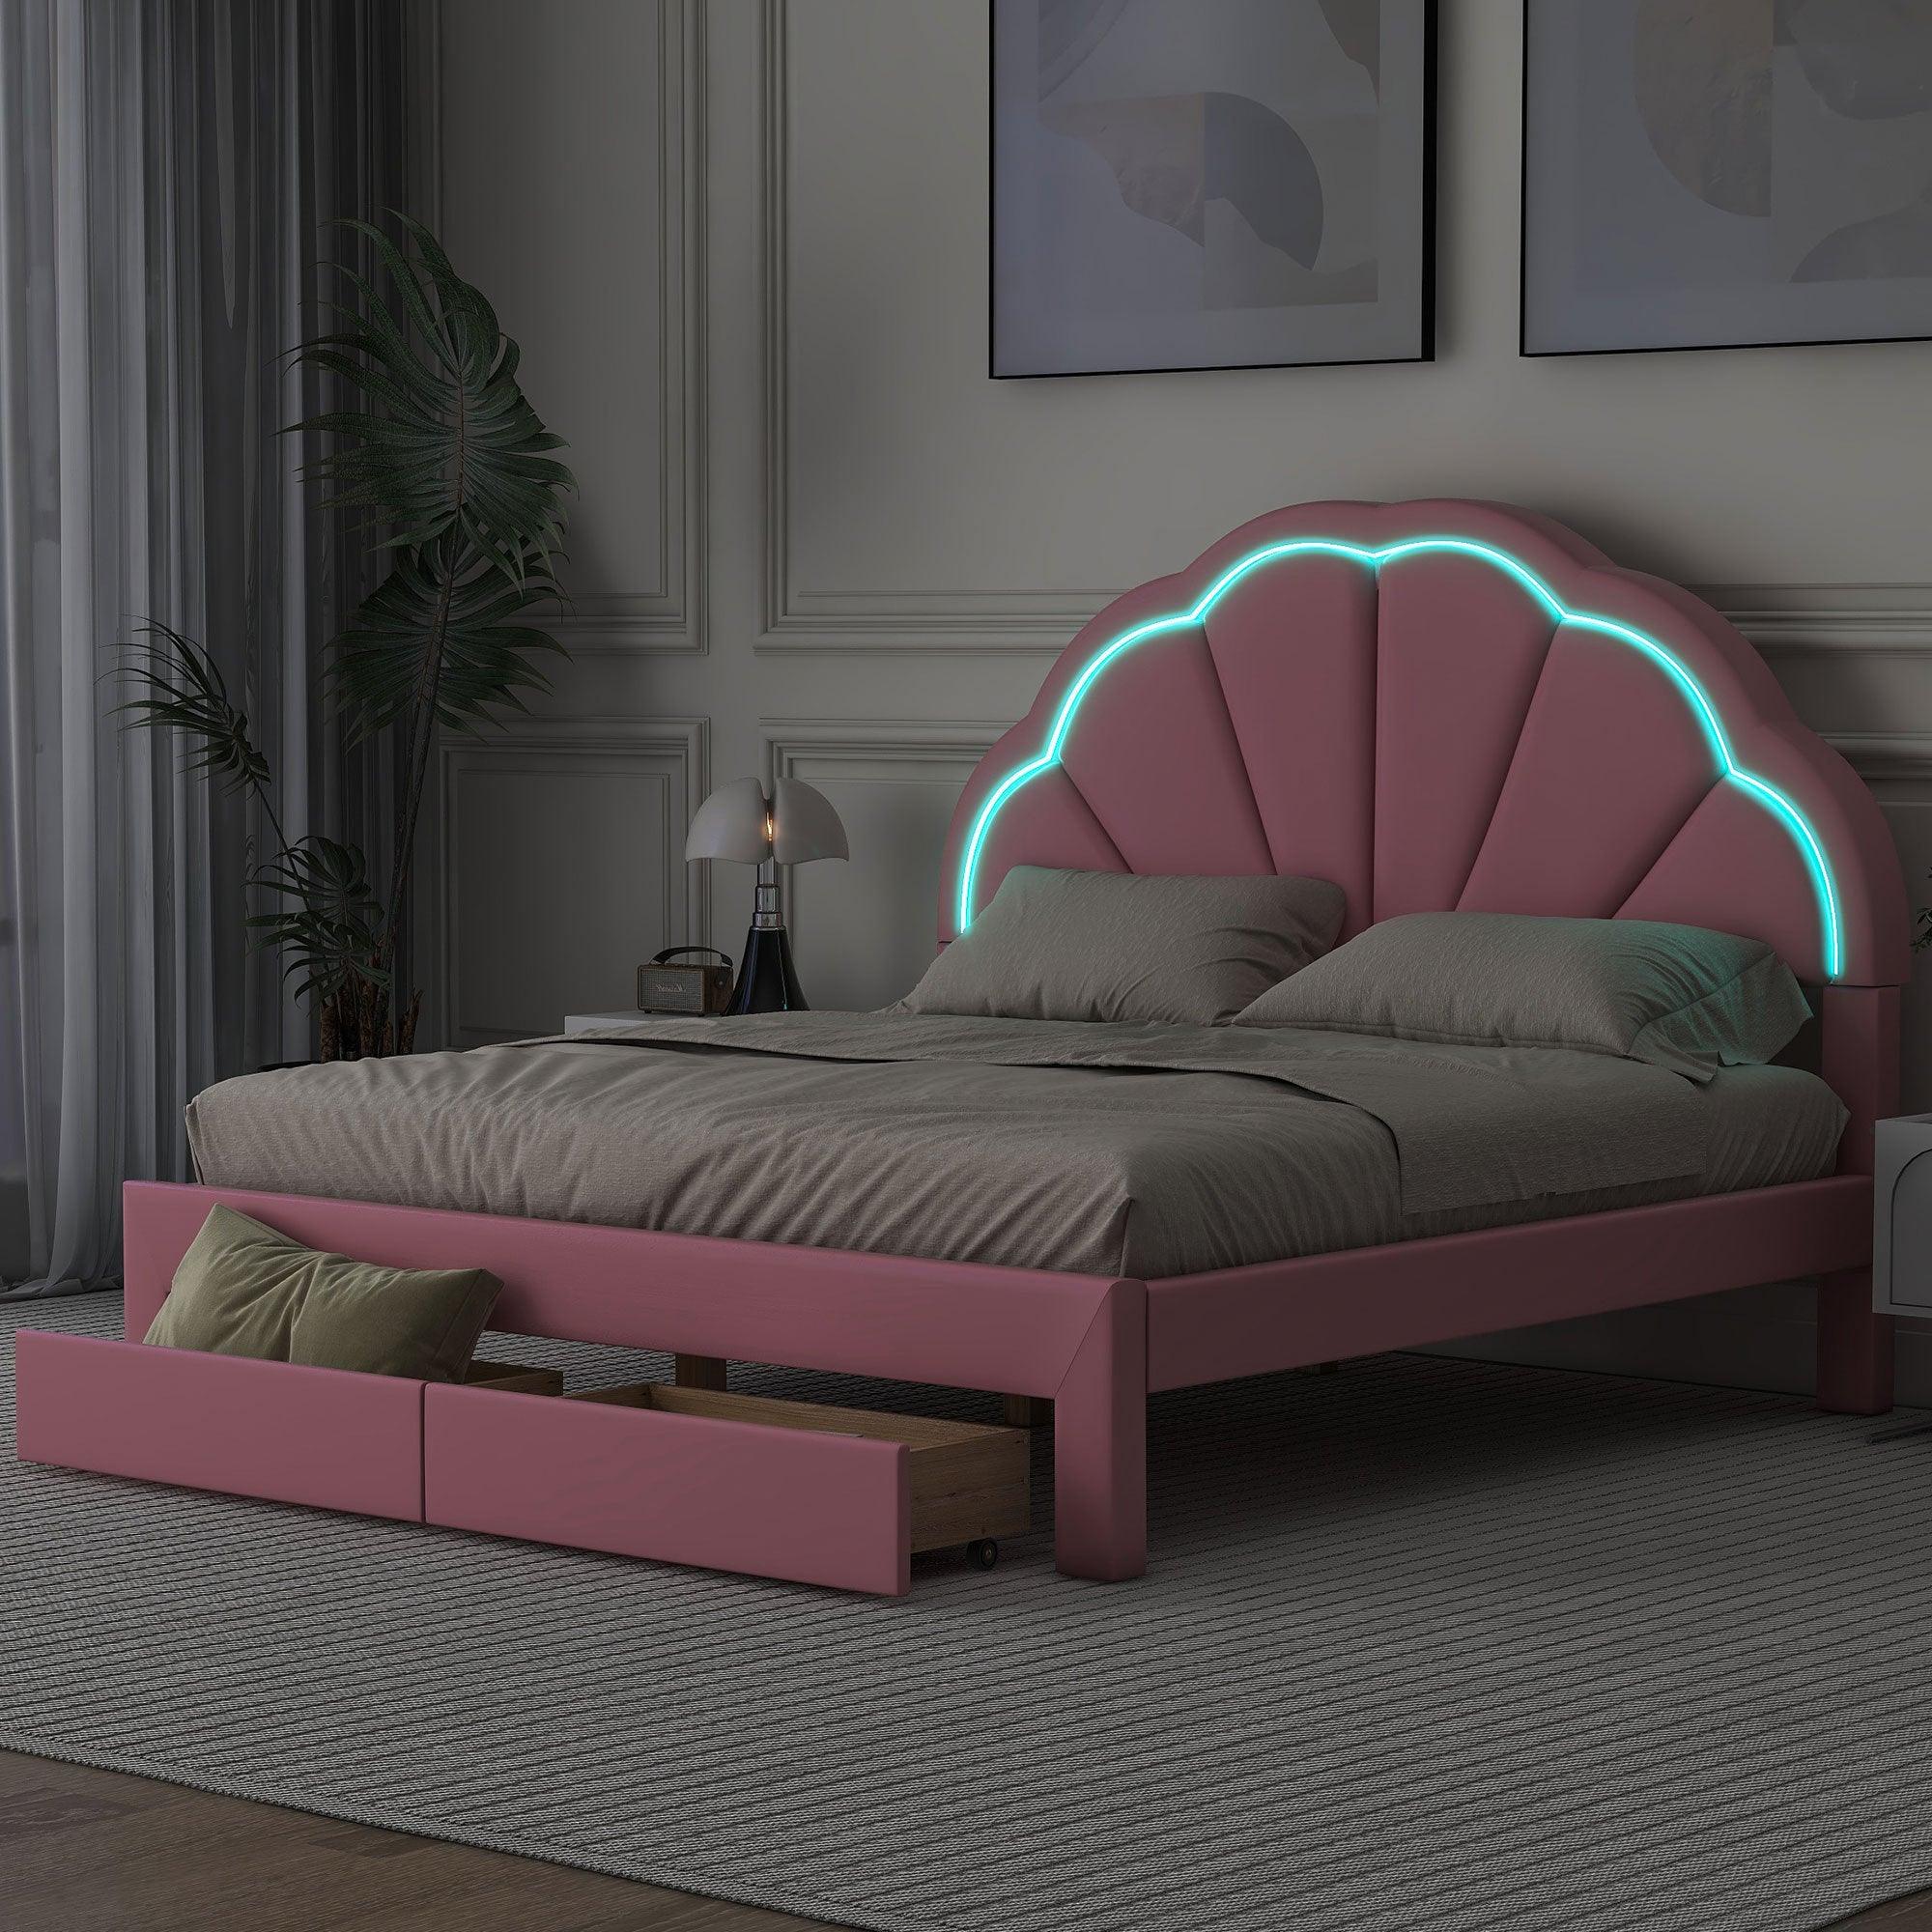 🆓🚛 Queen Size Upholstered Platform Bed With Seashell Shaped Headboard, Led & 2 Drawers, Pink